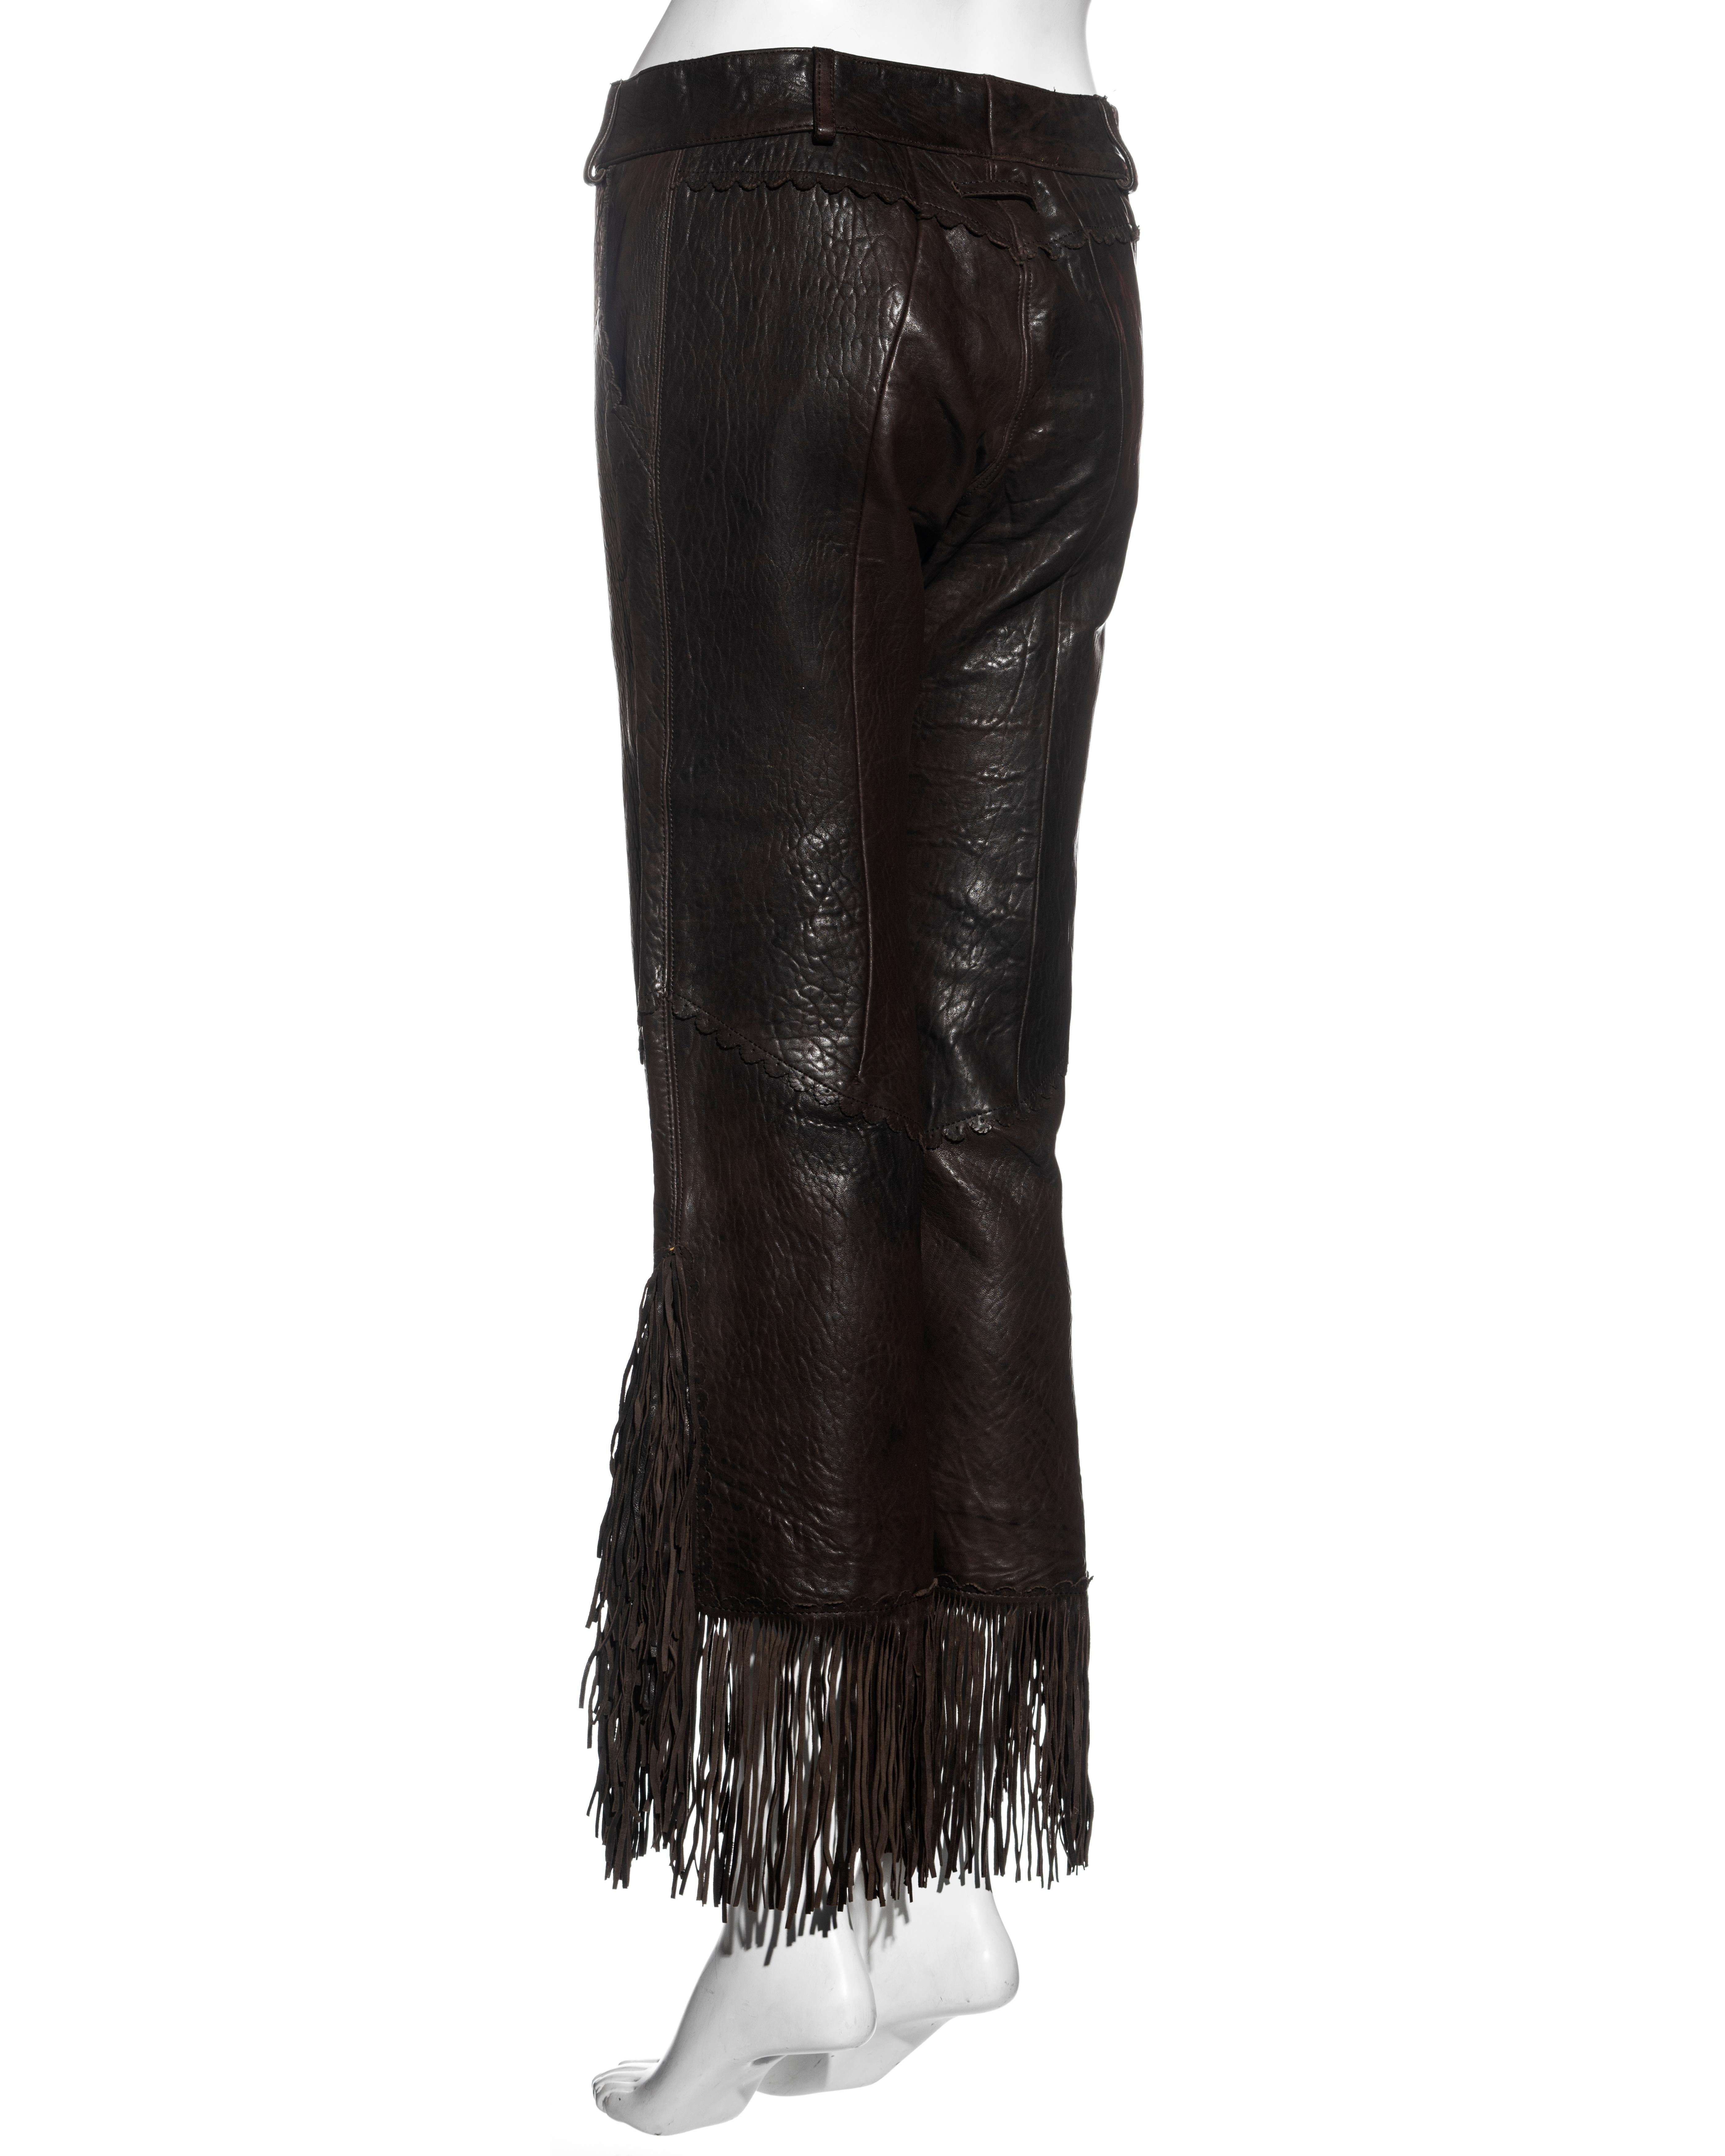 Jean Paul Gaultier brown leather pants with fringe pants, c. 2000 In Excellent Condition For Sale In London, GB